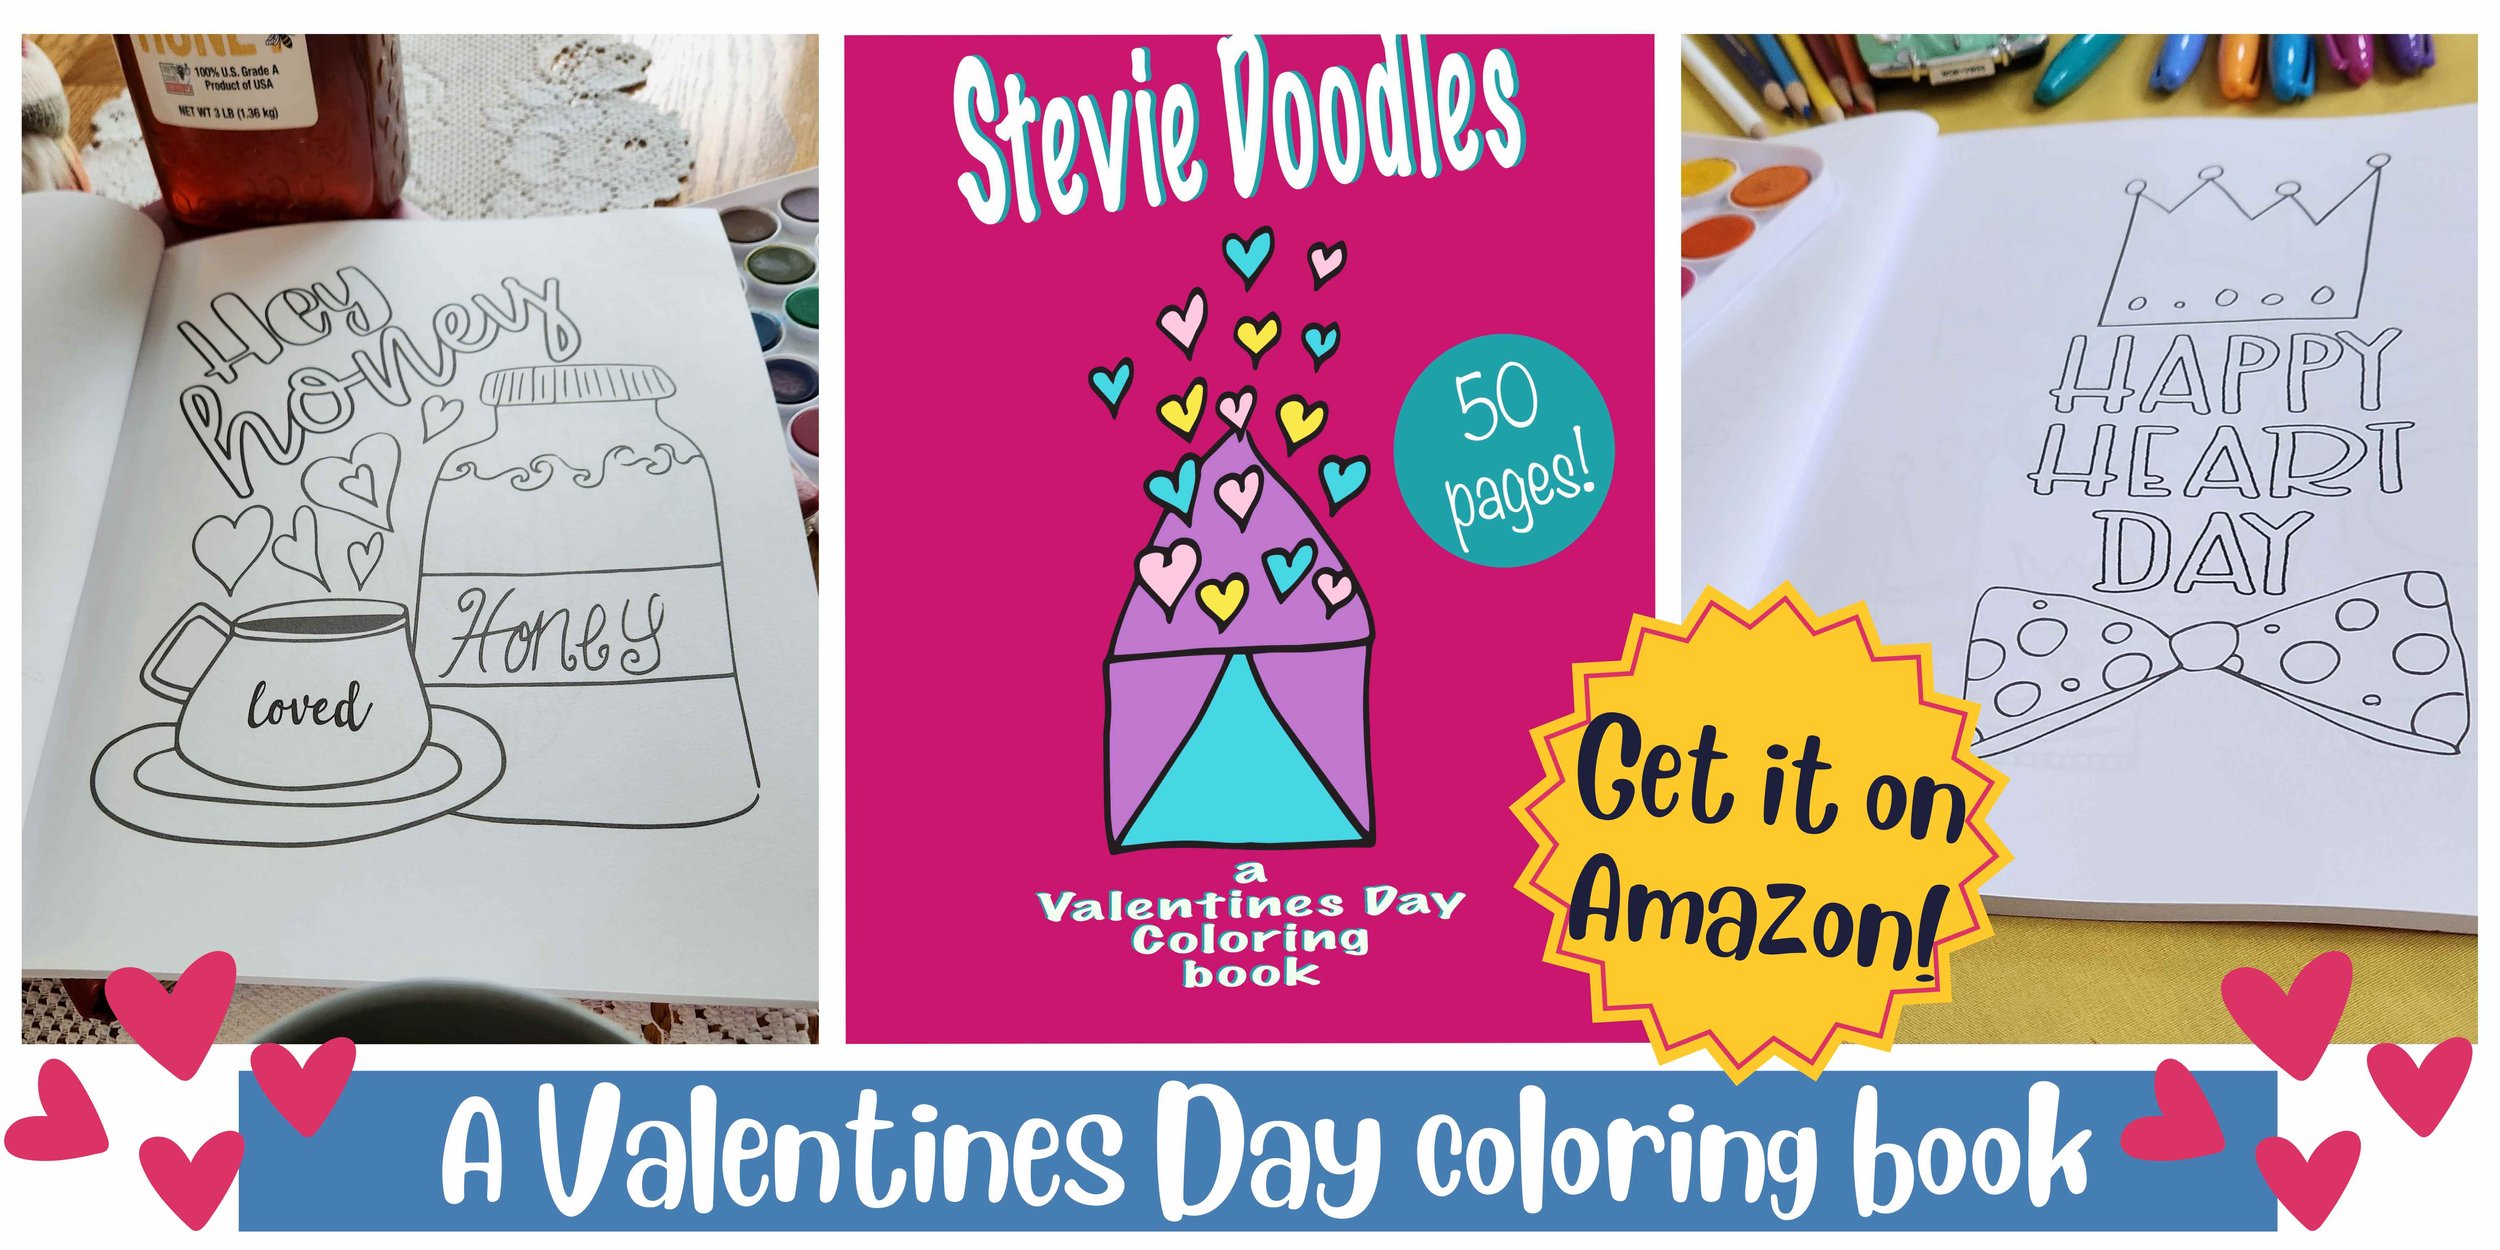 text "A valentines day coloring book" the cover of my book + 2 coloring pages from the book